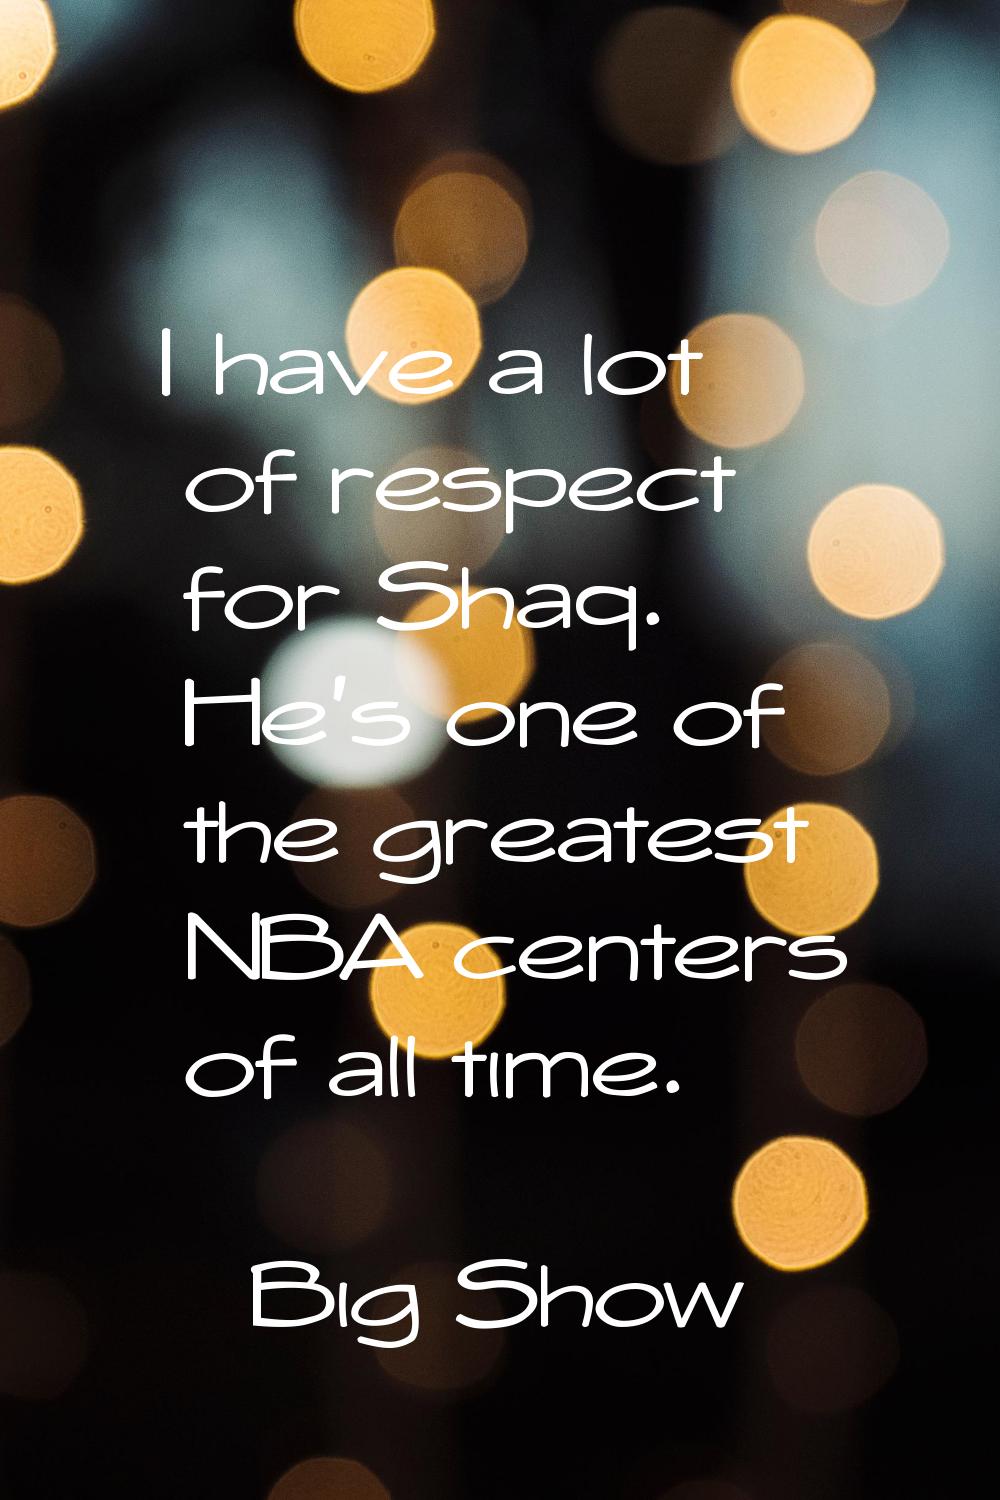 I have a lot of respect for Shaq. He's one of the greatest NBA centers of all time.